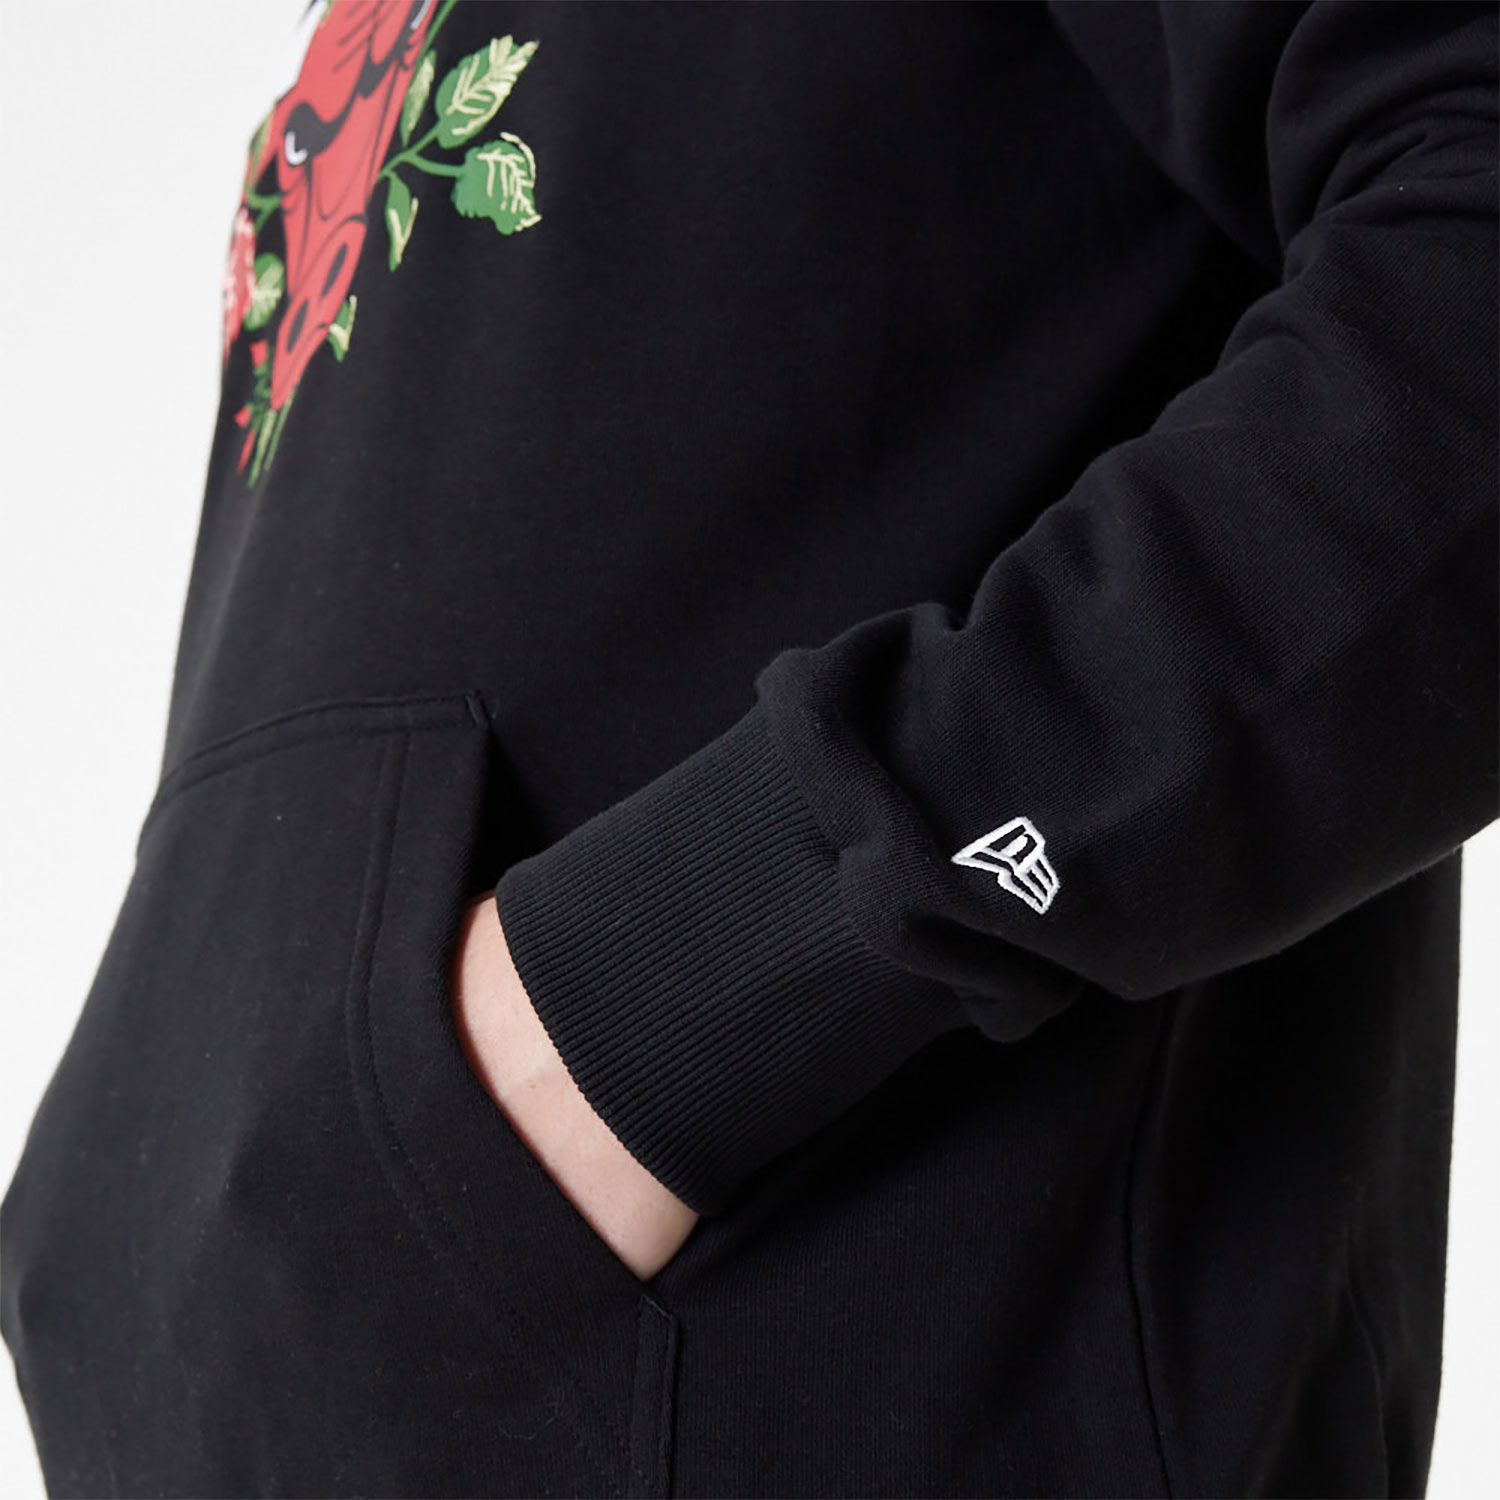 Chicago Bulls Floral Graphic Black Pullover Hoodie